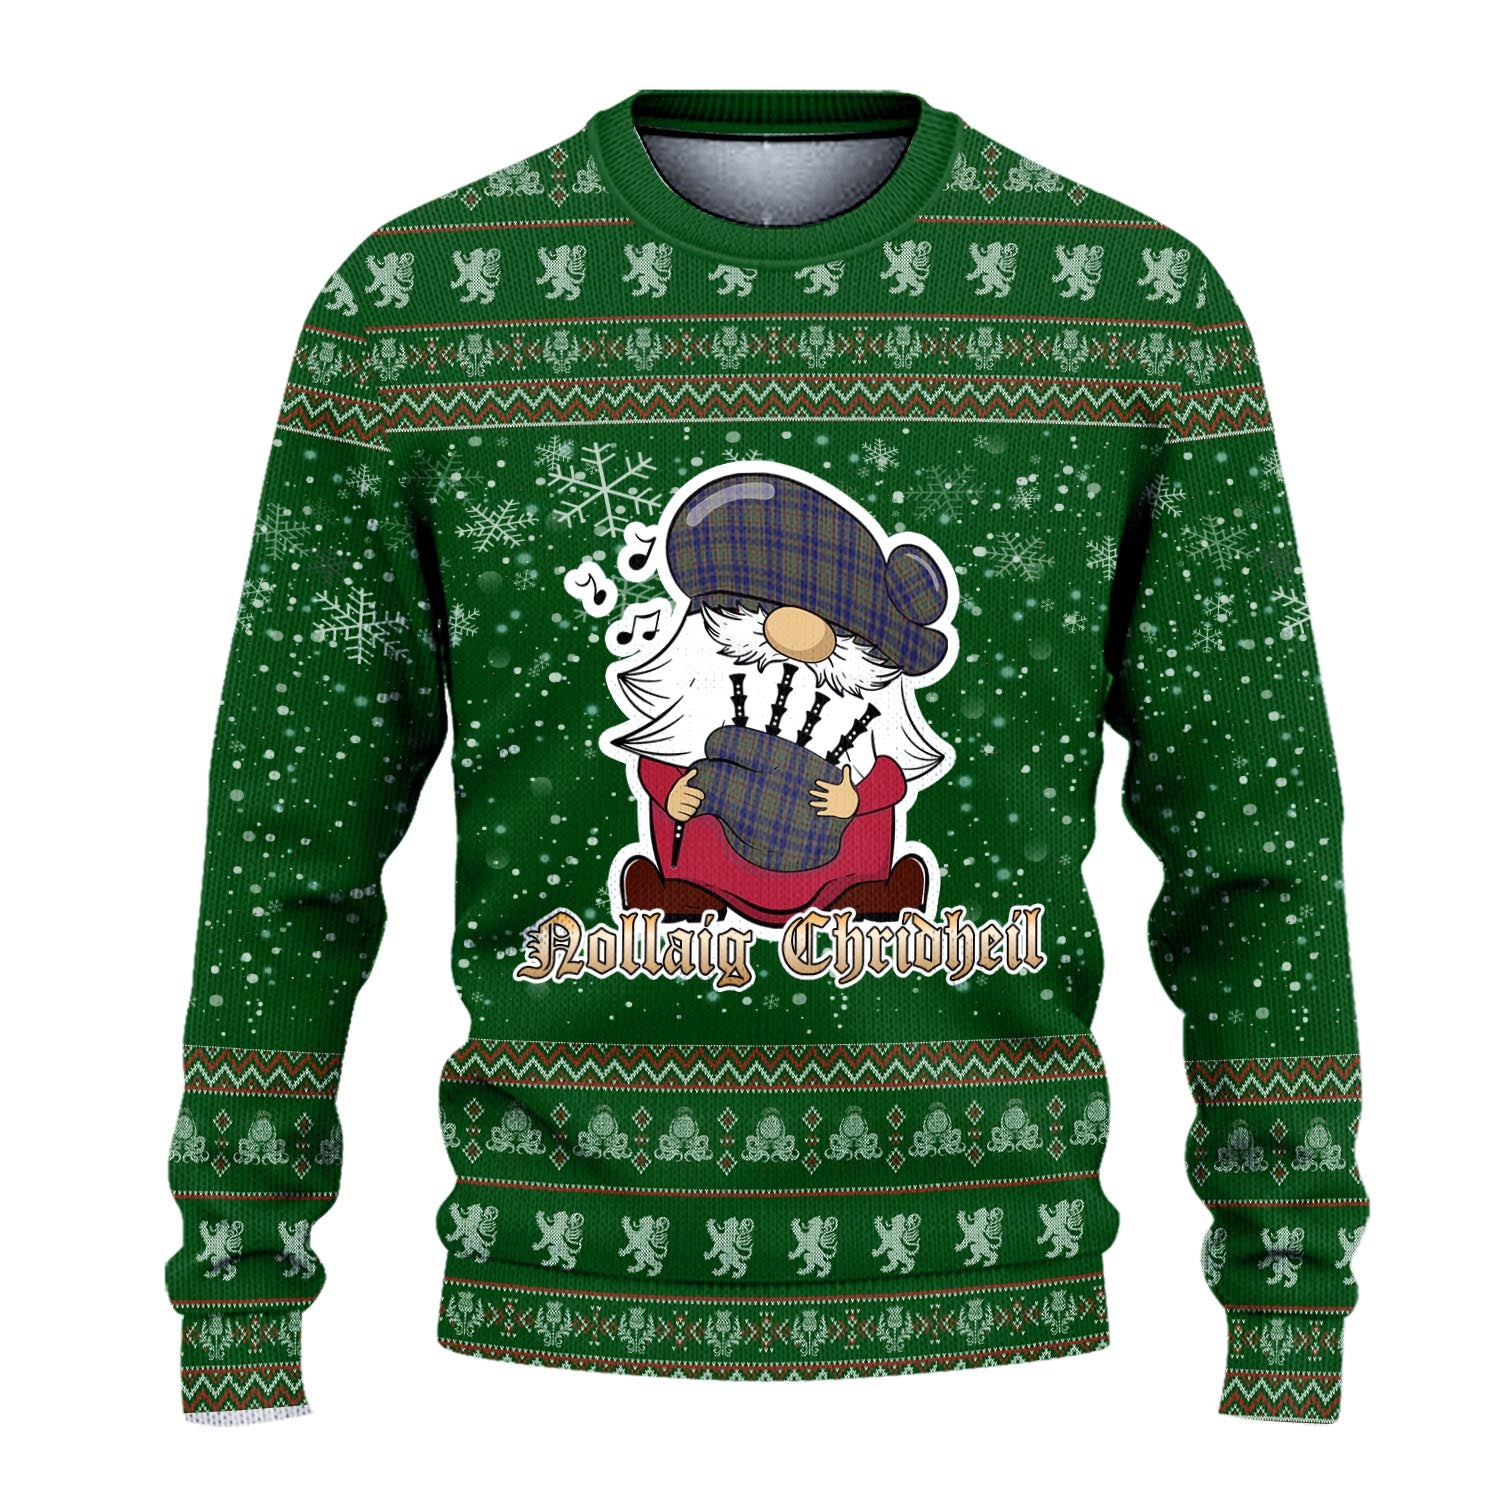 Kildare County Ireland Clan Christmas Family Knitted Sweater with Funny Gnome Playing Bagpipes - Tartanvibesclothing